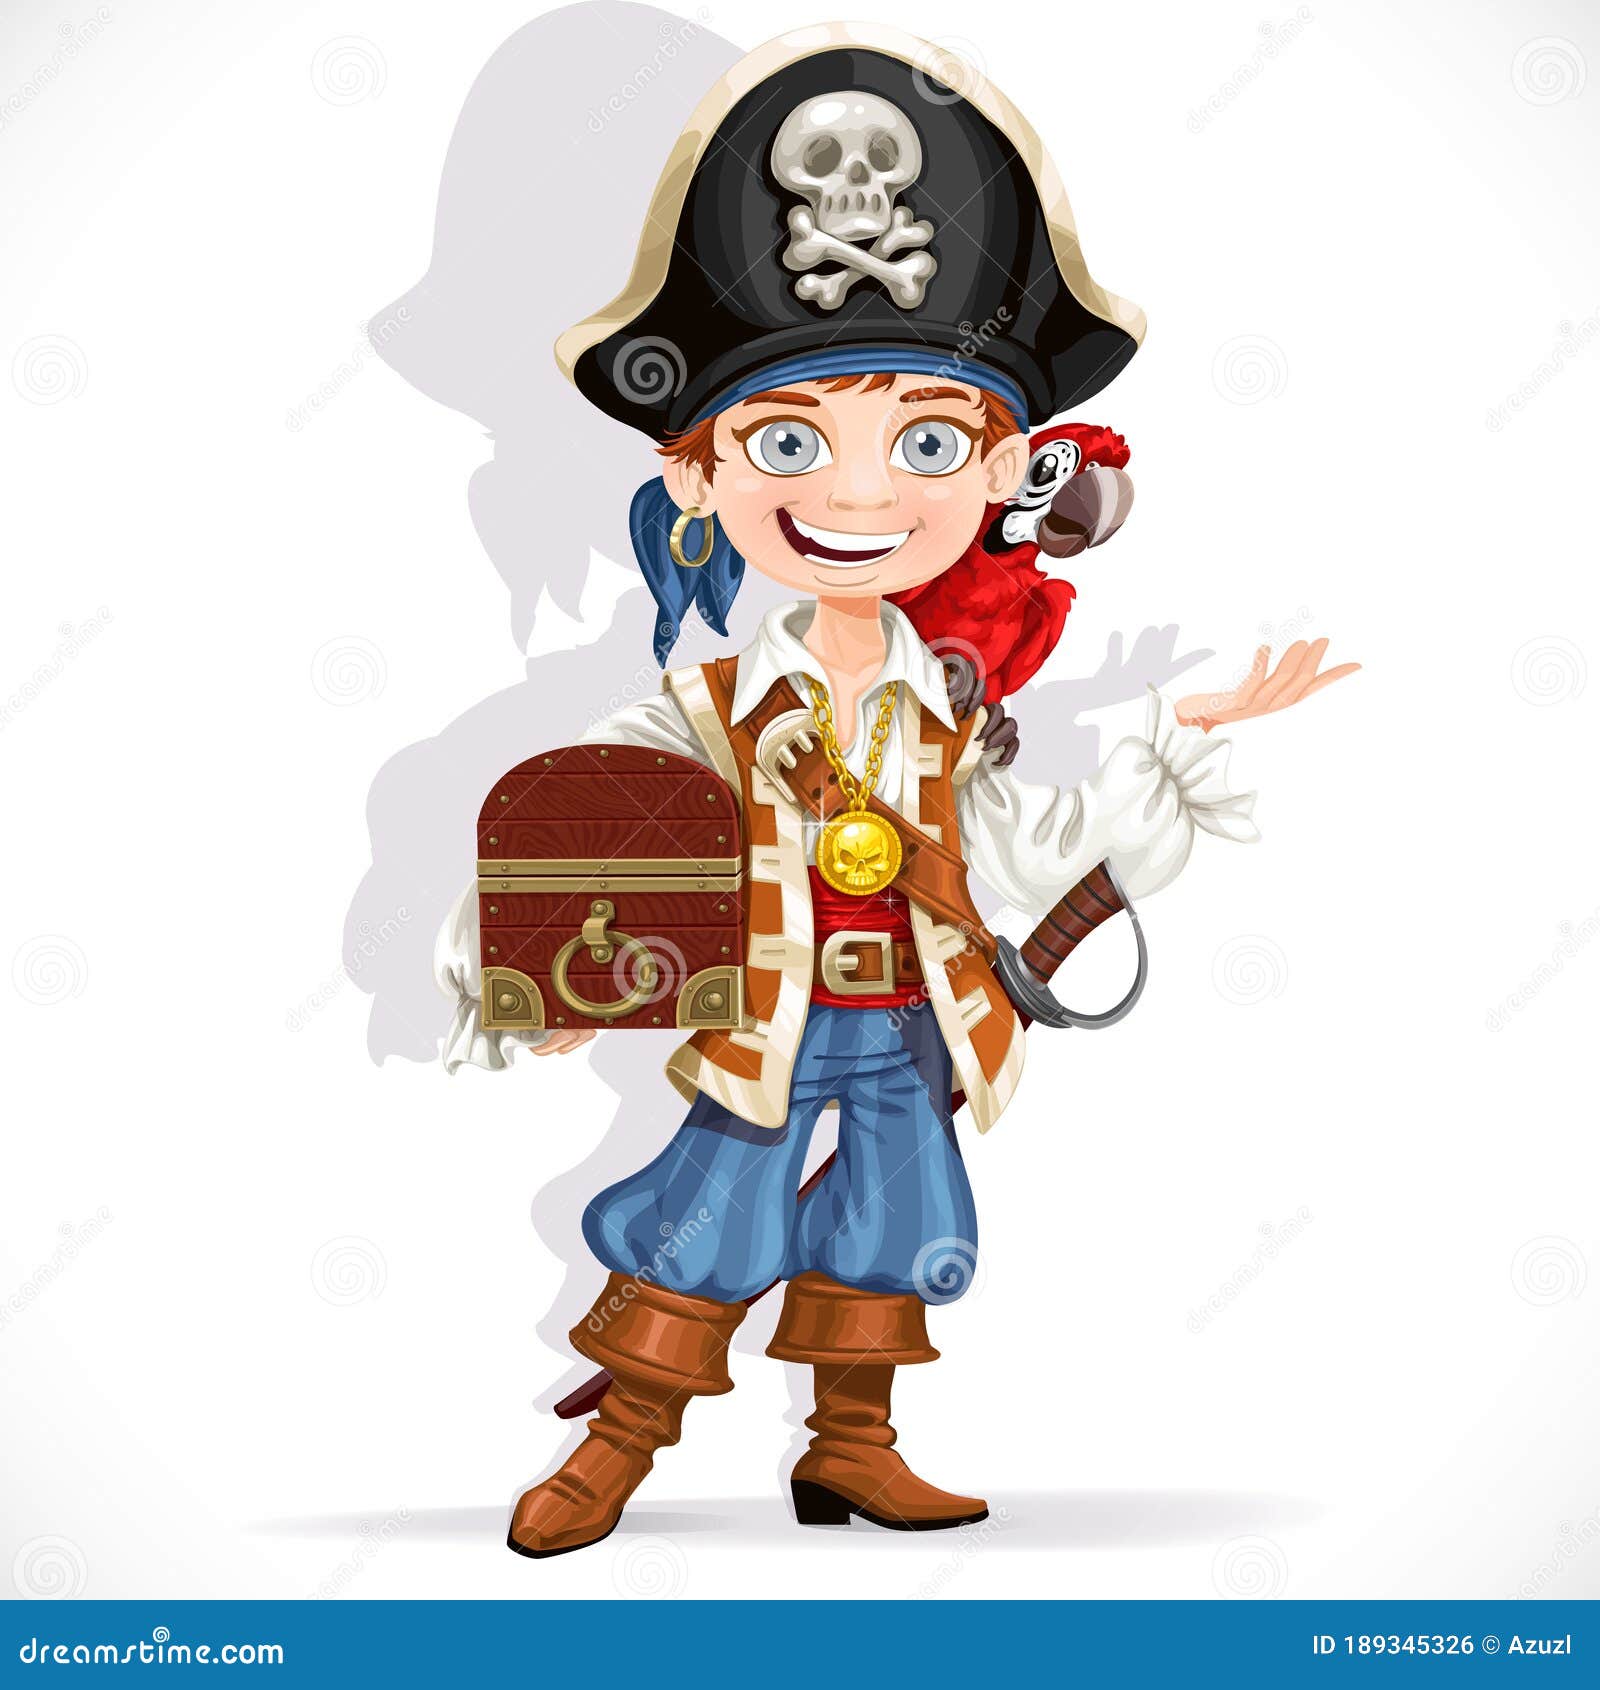 Cute Pirate Boy With Red Parrot Hold Treasure Chest Isolated On A White ...